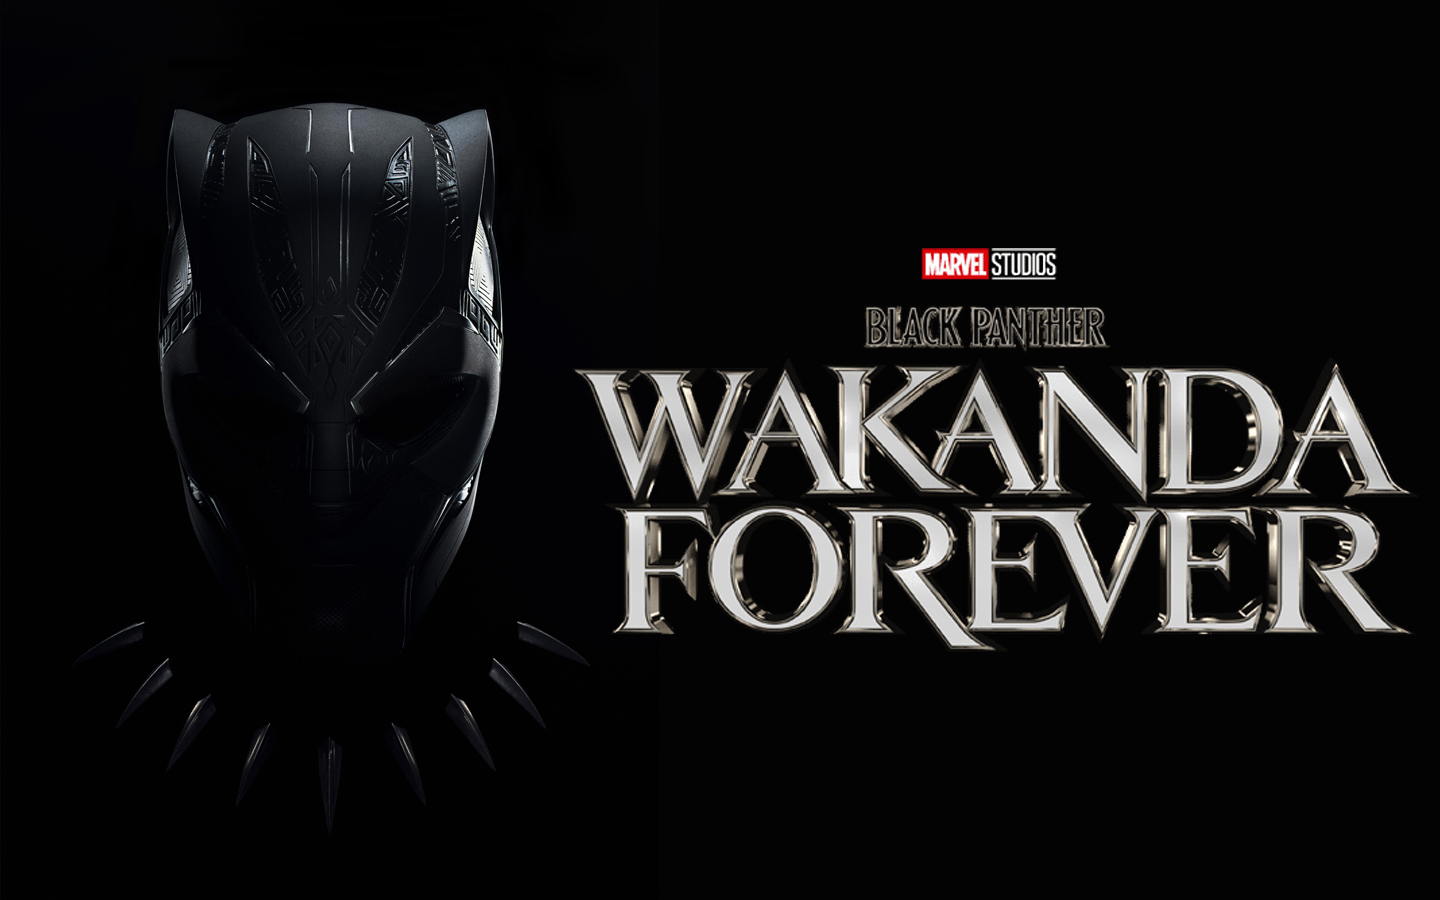 ‘Black Panther: Wakanda Forever’ Is A Beautiful Tribute To Chadwick Boseman And One Of Marvel’s Best – Review